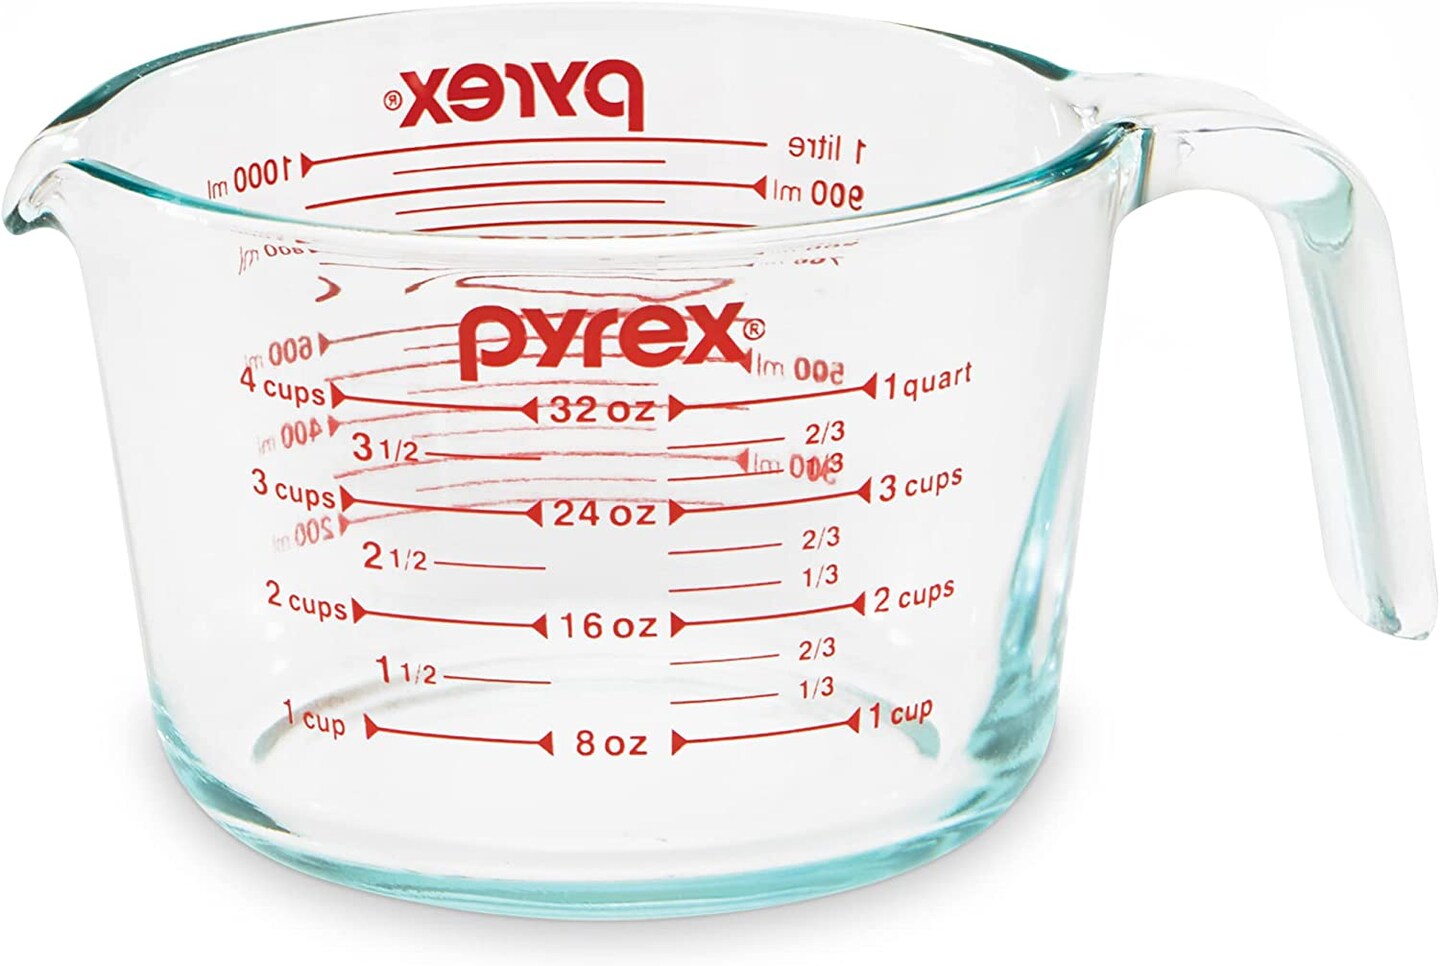 2 Pieces Measuring Cups Beakers Measuring Cups Glass for Kitchen